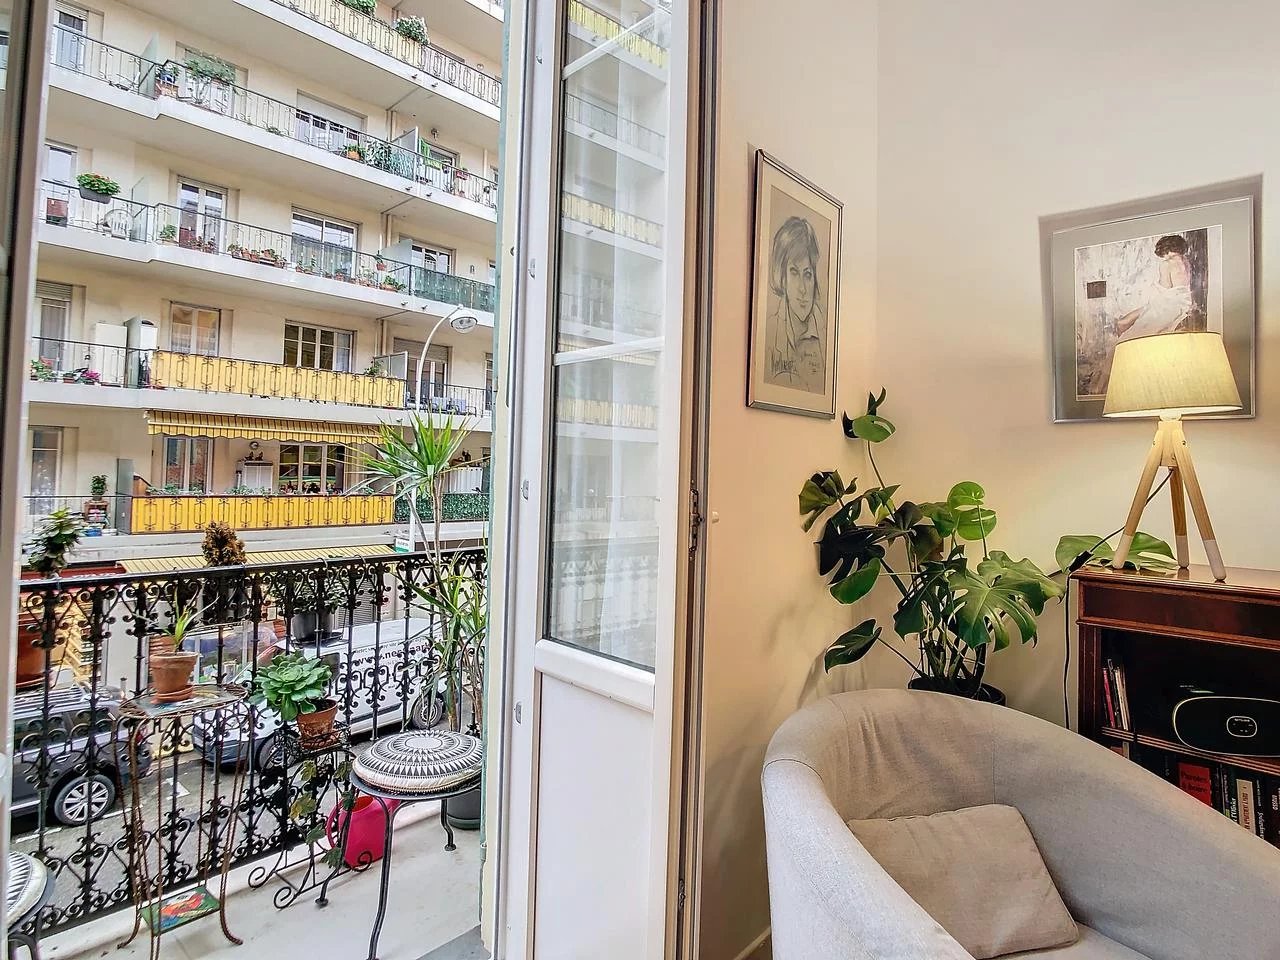 Appartement  3 Rooms 57.97m2  for sale   314 000 €